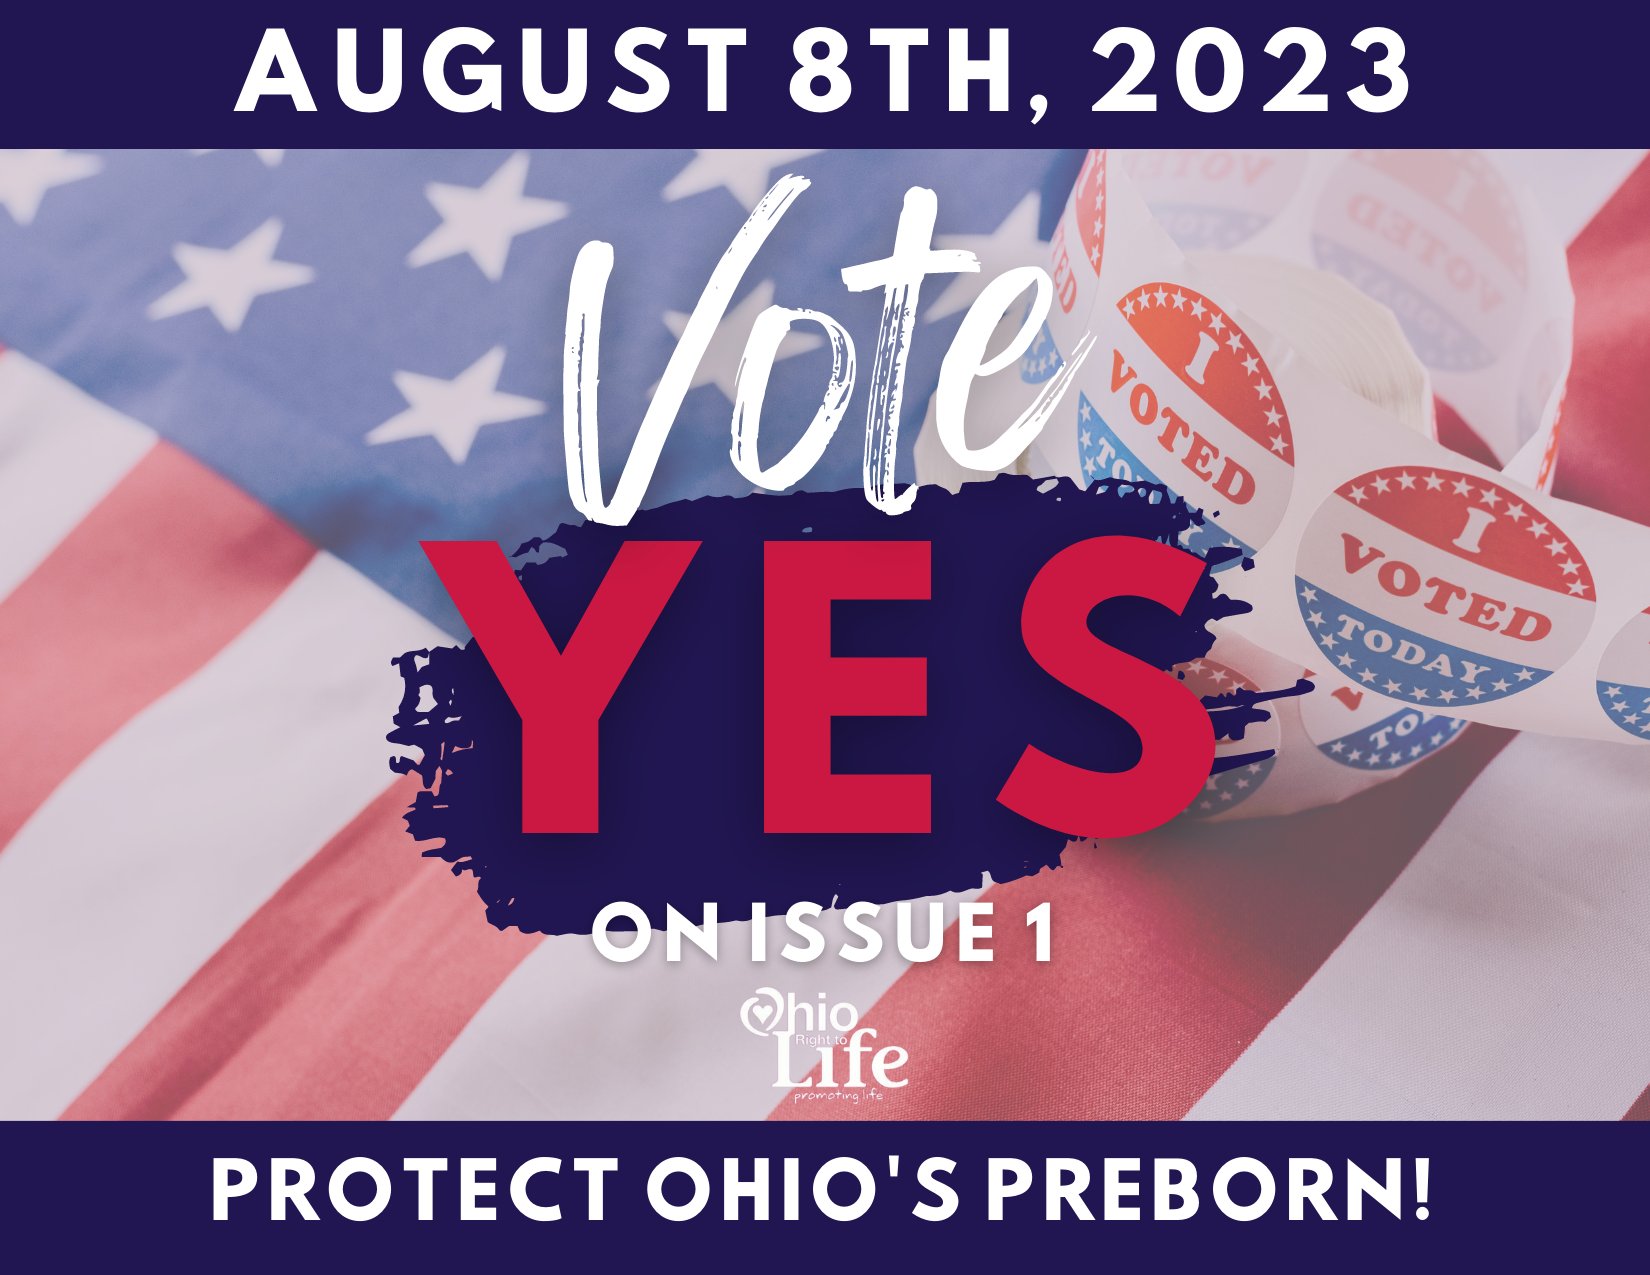 Ohio Must Vote for Issue 1 to Stop Unlimited Abortions Up to Birth